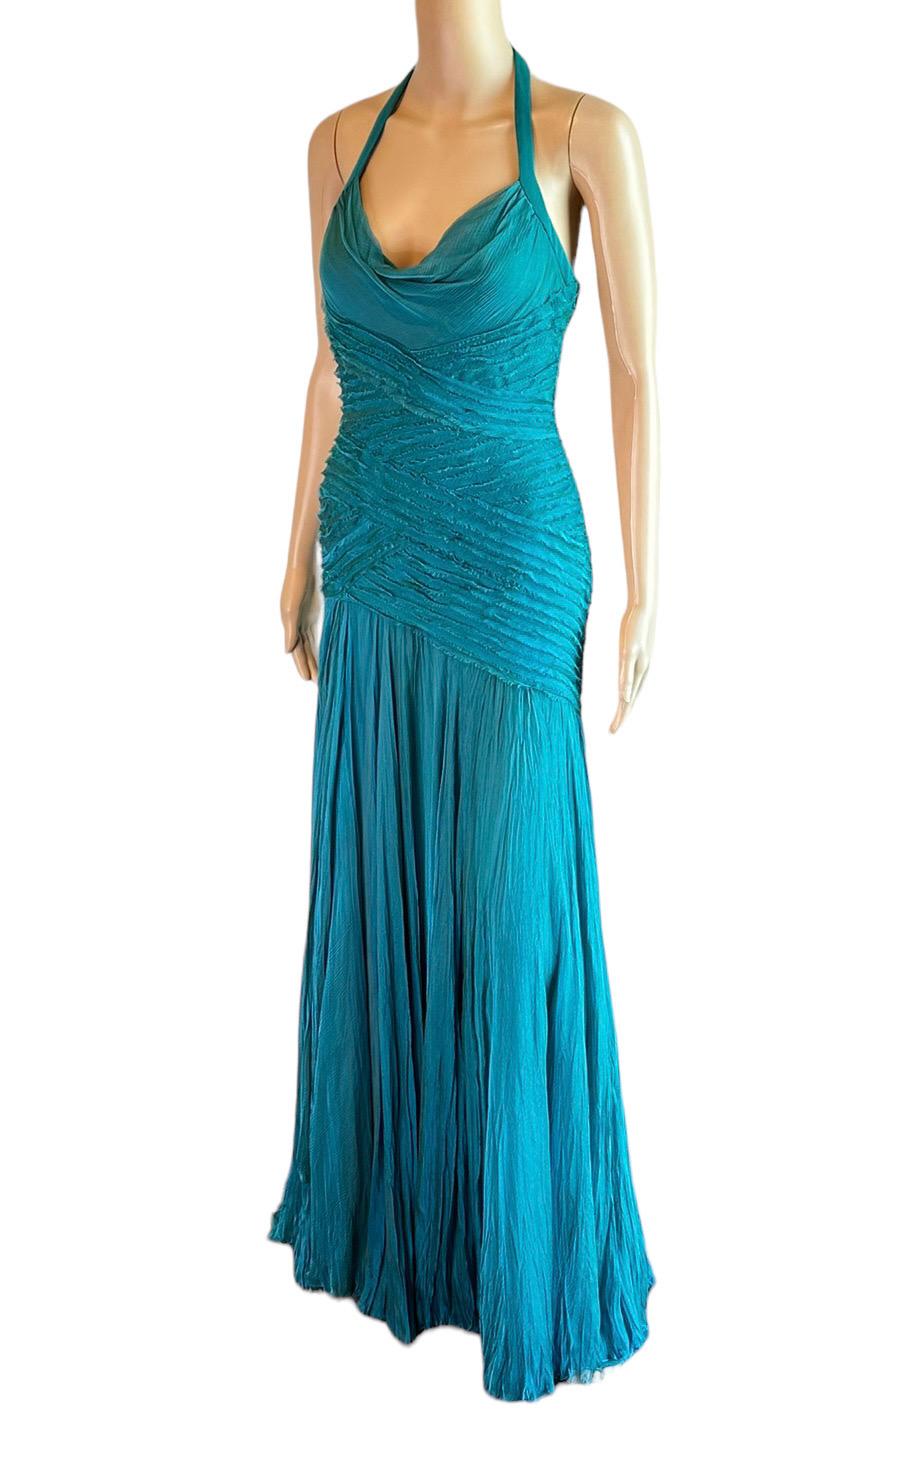 Versace F/W 2005 Runway Campaign Halter High Slit Slip Evening Dress Gown  For Sale 3